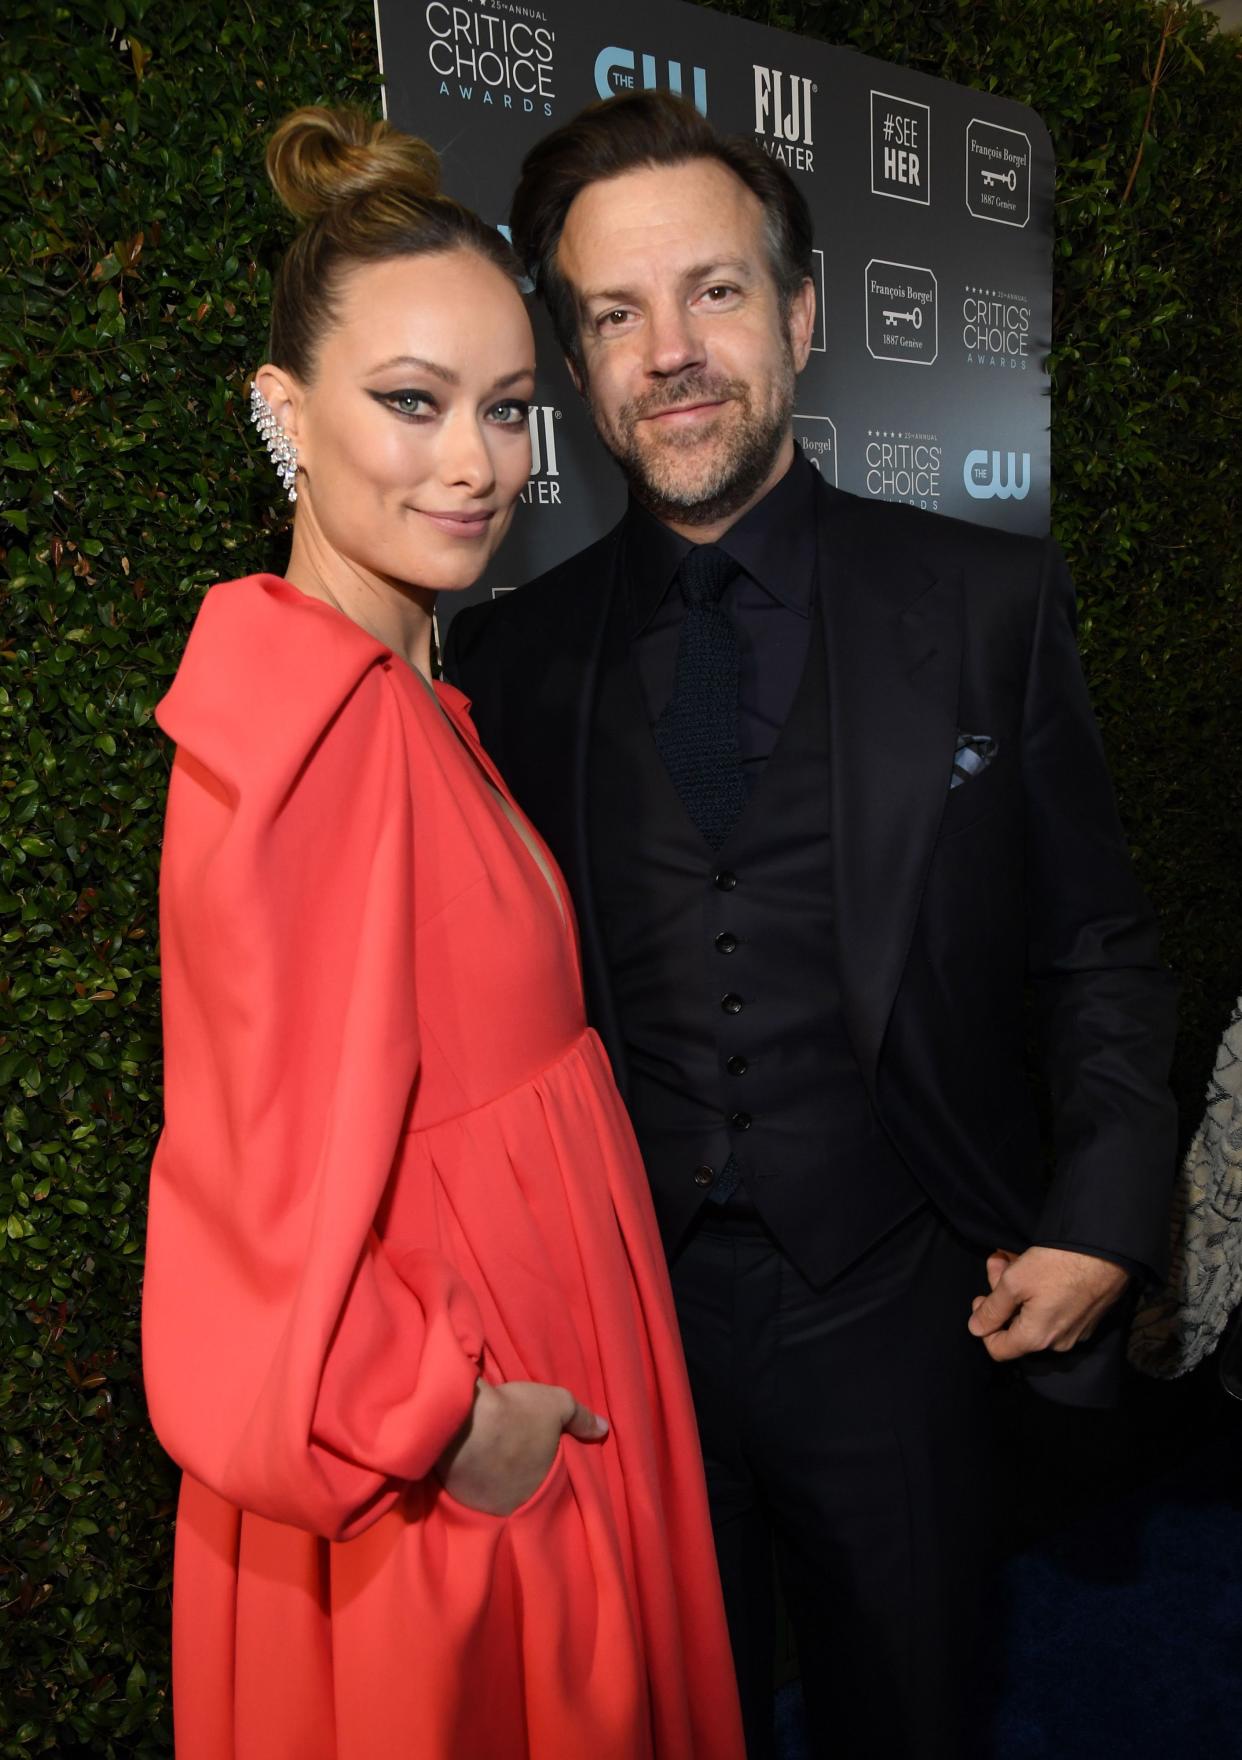 SANTA MONICA, CALIFORNIA - JANUARY 12: (L-R) Olivia Wilde and Jason Sudeikis attend the 25th Annual Critics' Choice Awards at Barker Hangar on January 12, 2020 in Santa Monica, California. (Photo by Kevin Mazur/Getty Images for Critics Choice Association)